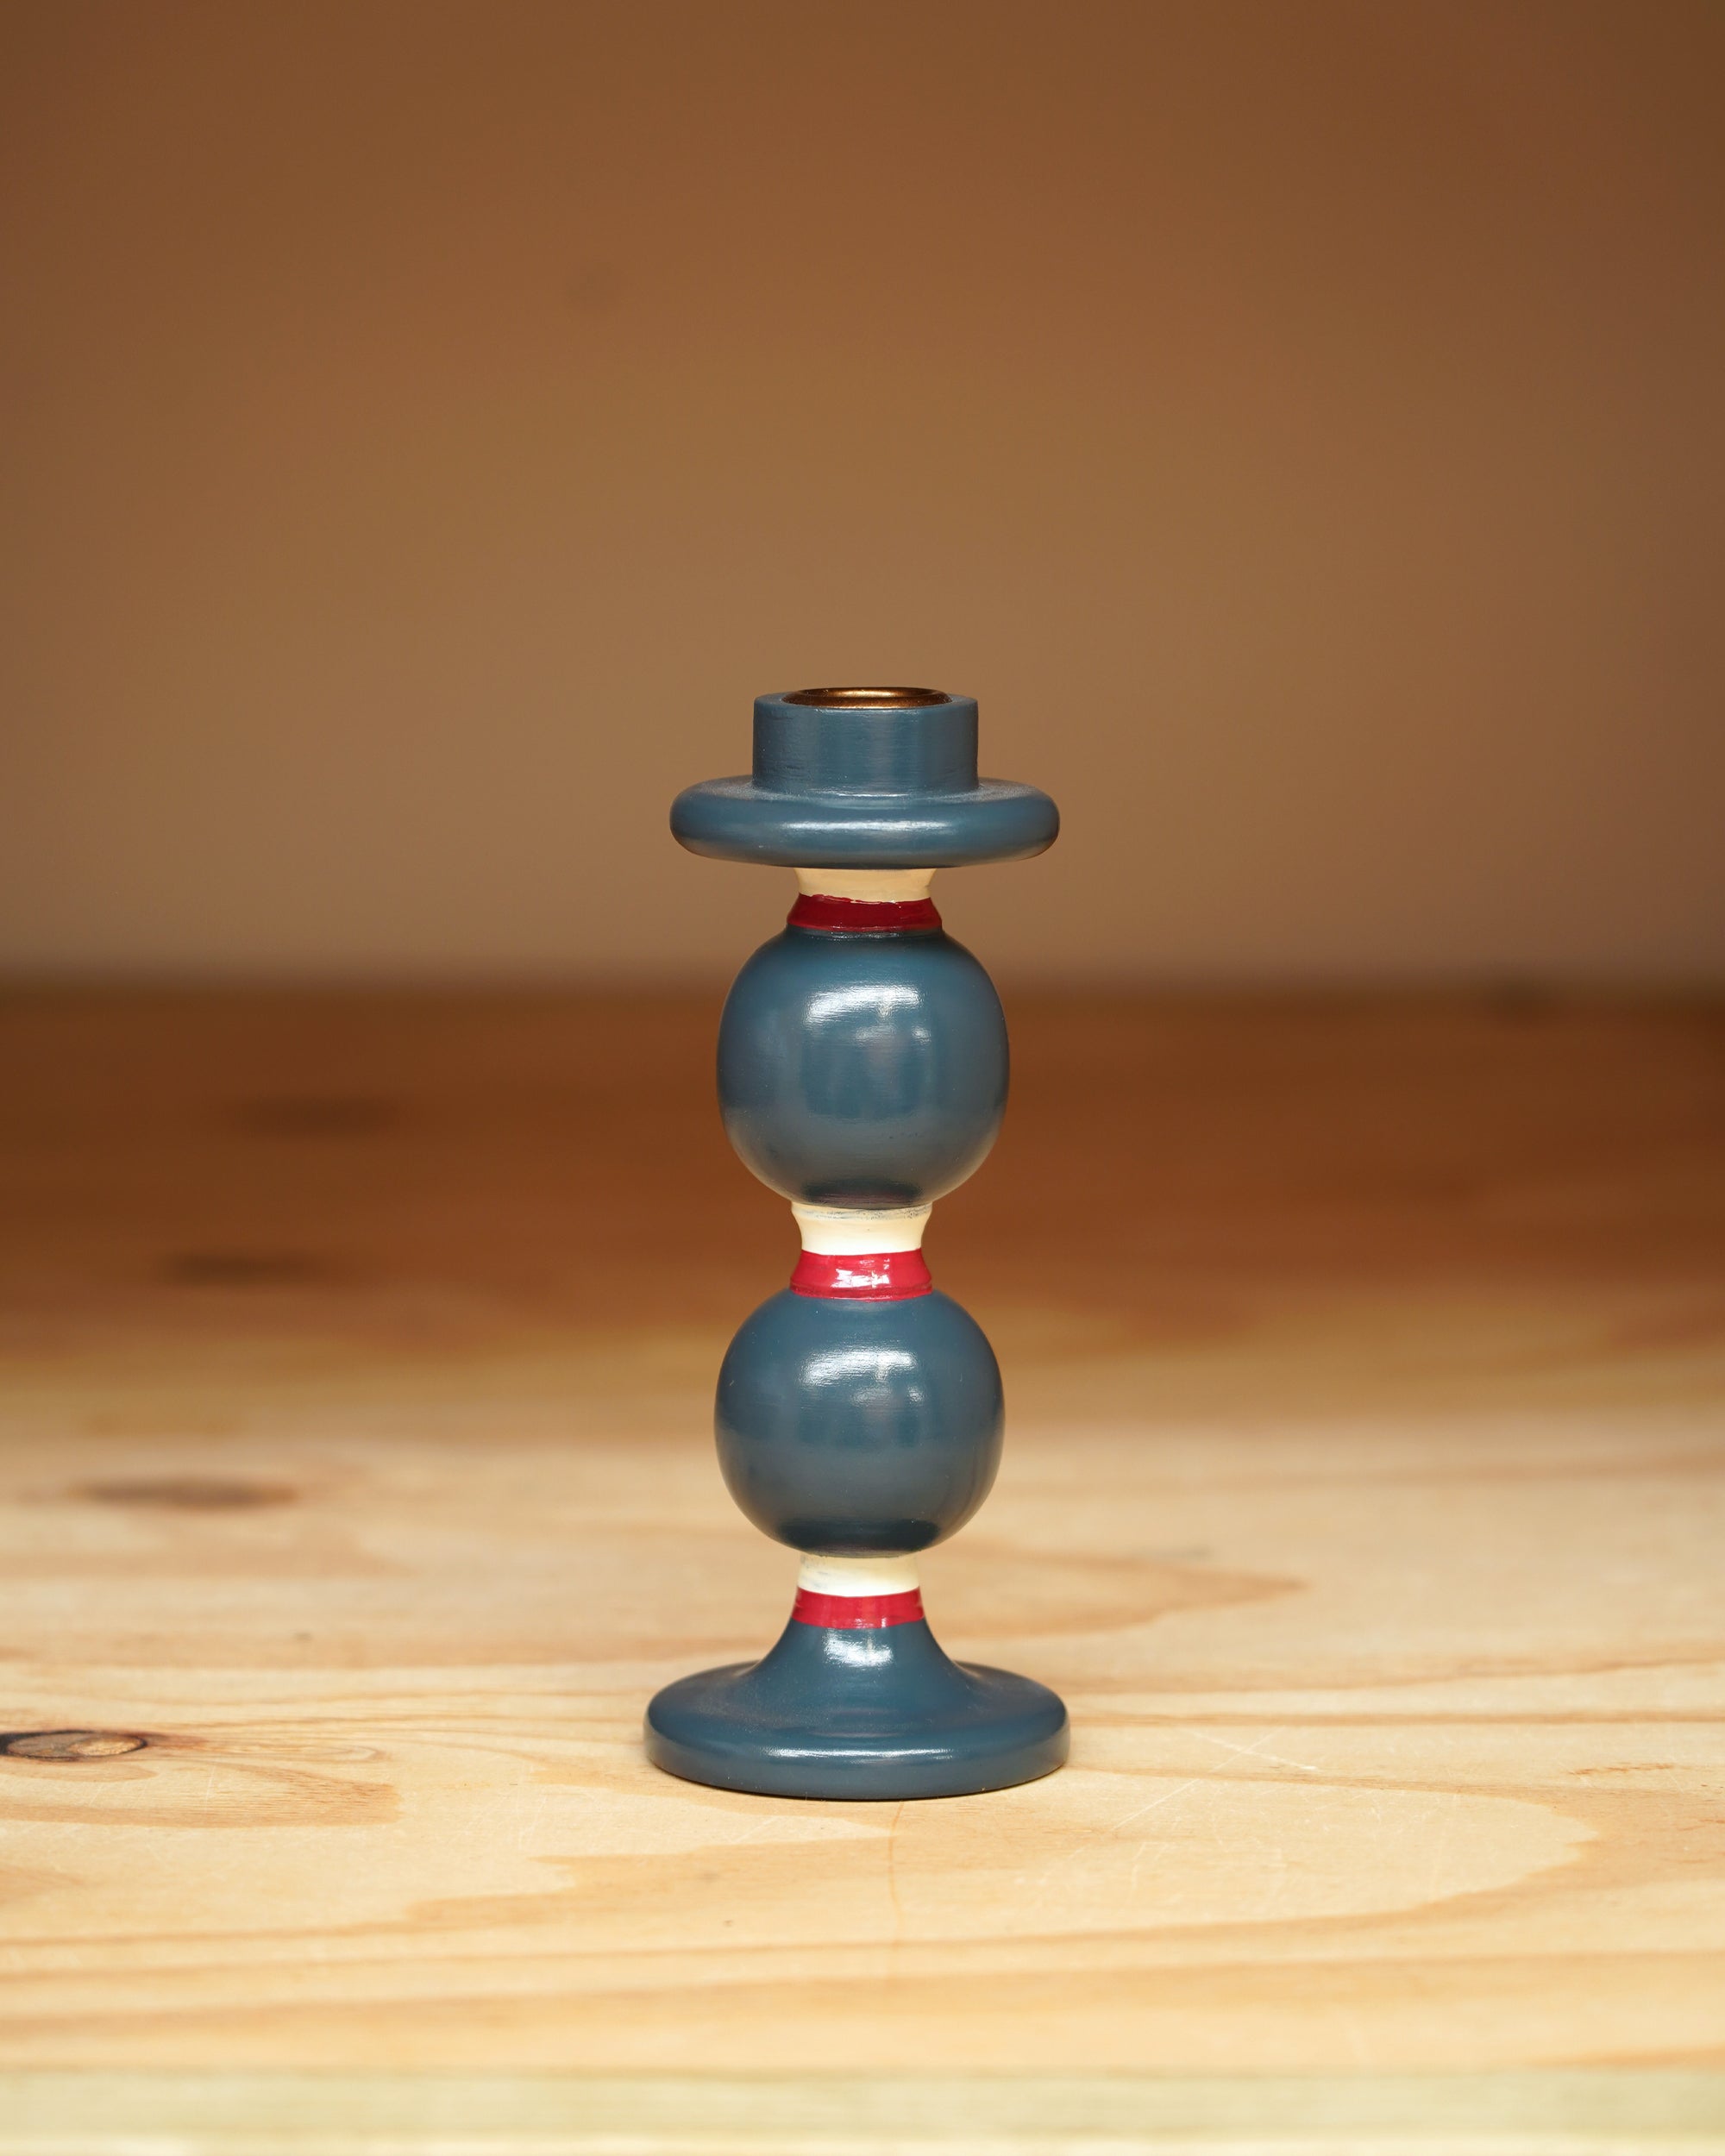 The Sensational Stripey Candlestick - The Dark Blue and Red